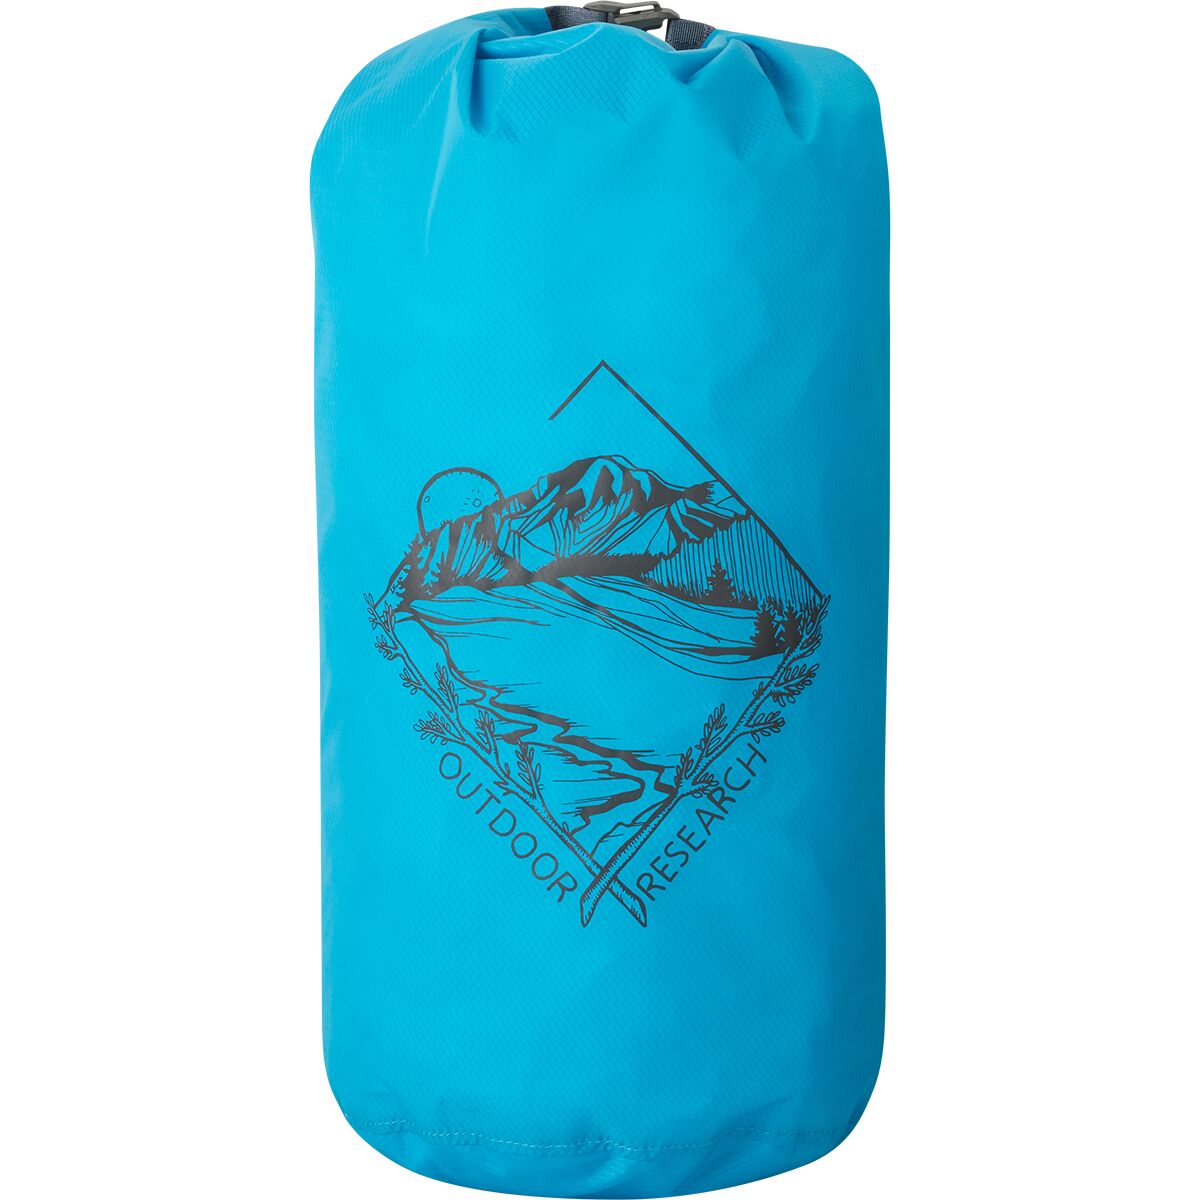 Outdoor Research Packout Graphic Dry Bag 15L